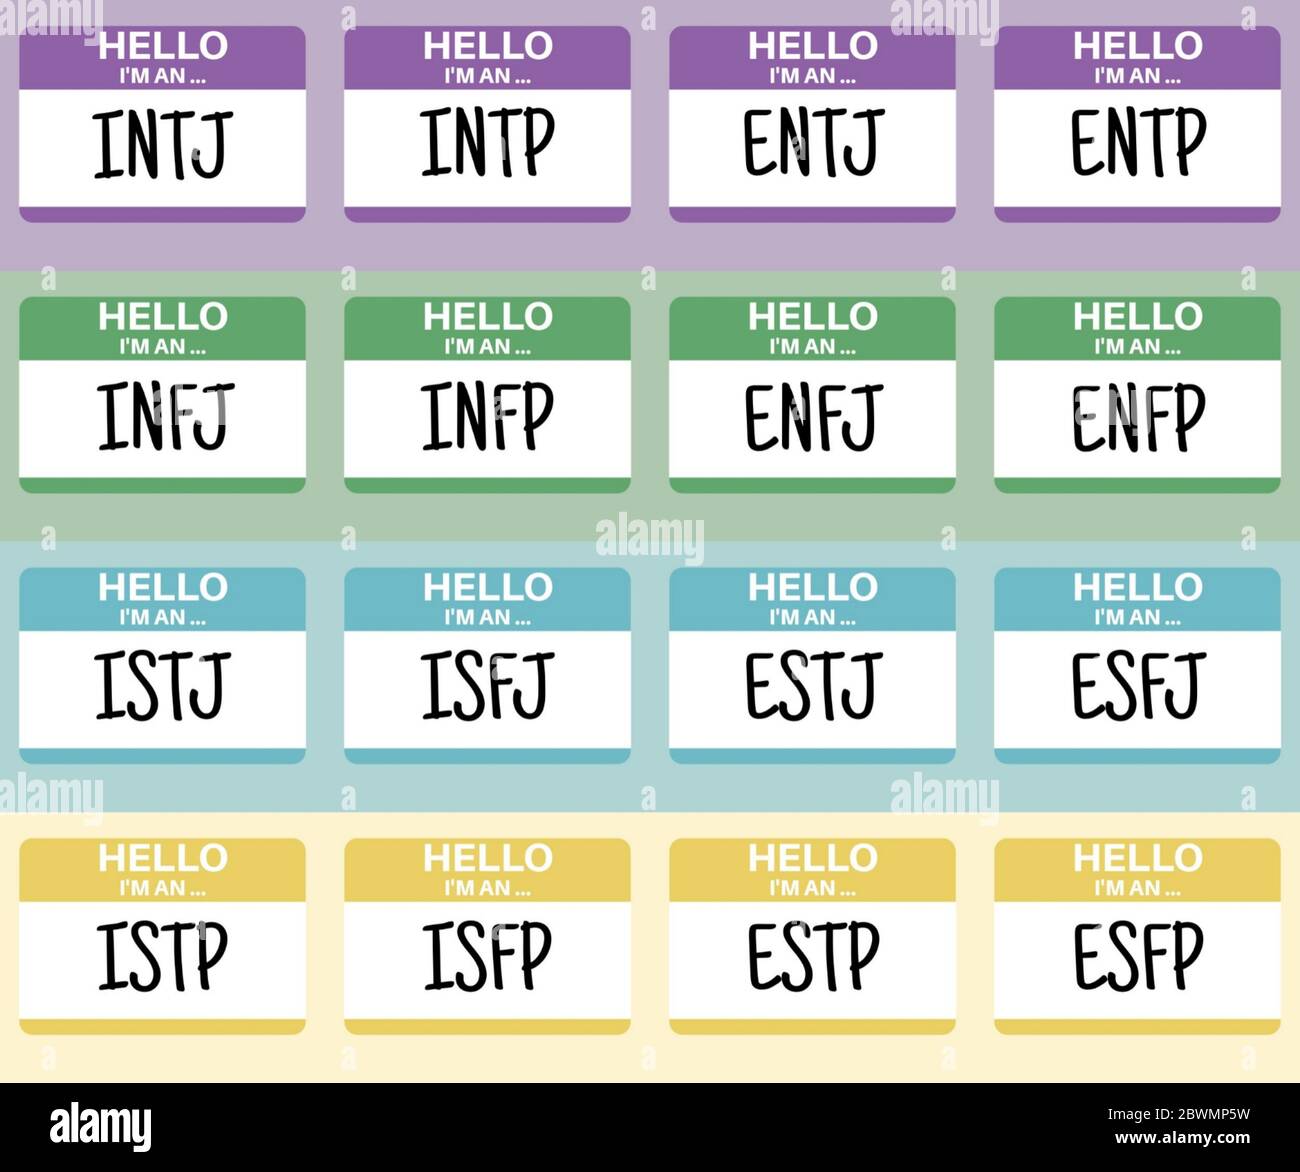 Image result for intj  Mbti, Infp personality type, Mbti charts